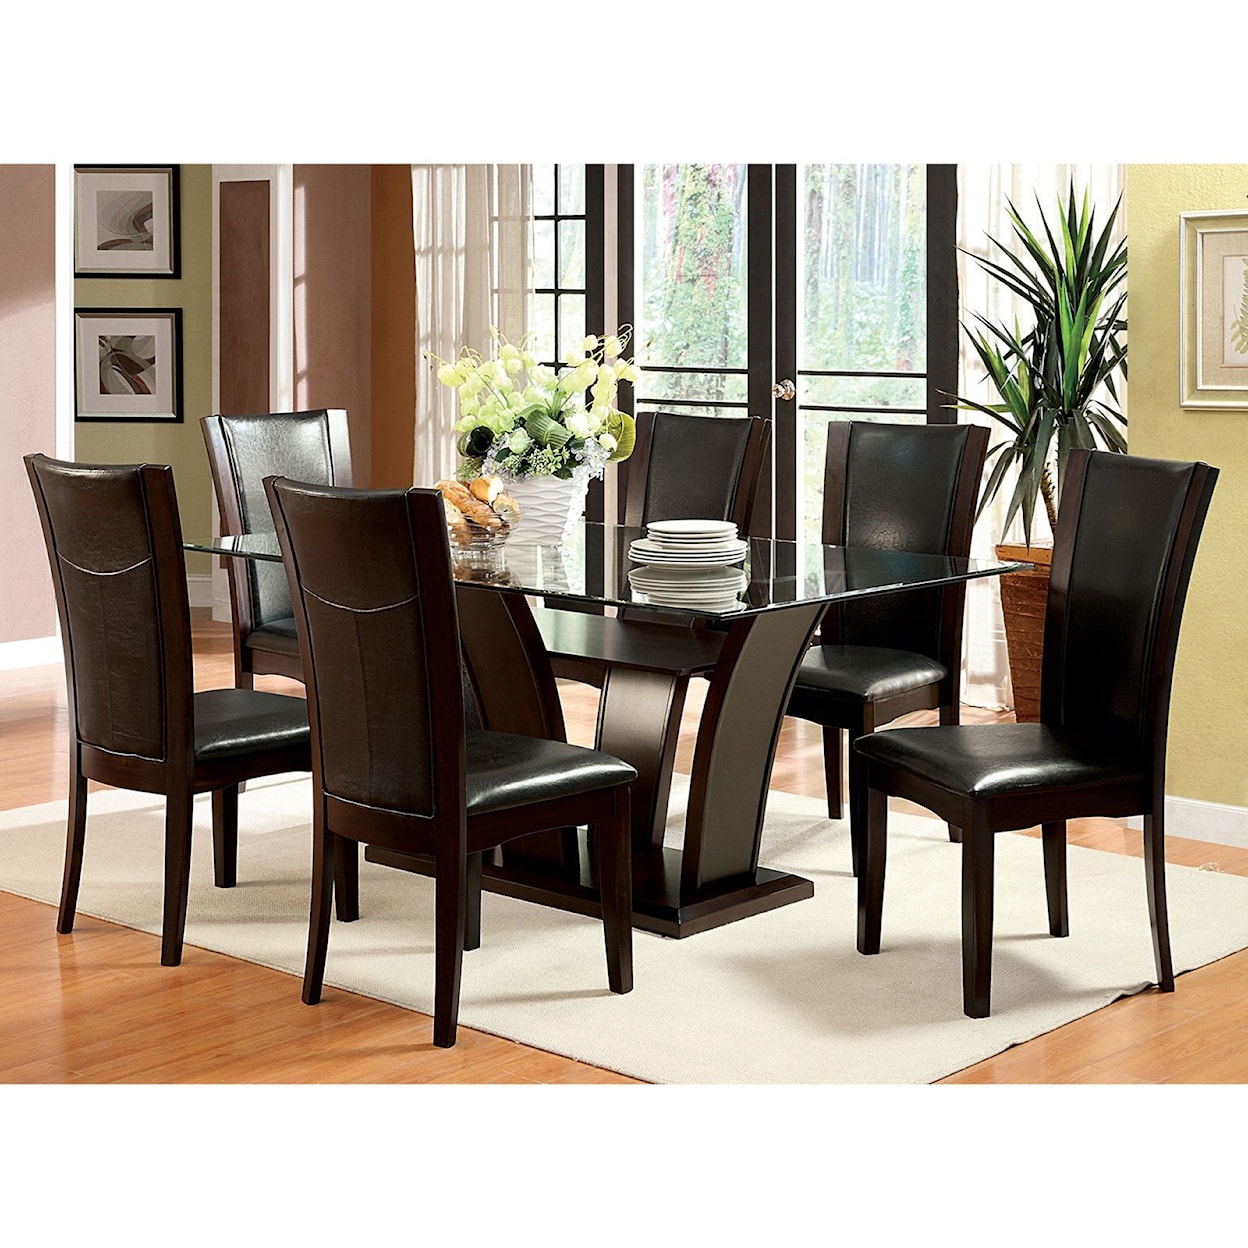 Furniture of America Manhattan I & II Table and 6 Side Chairs